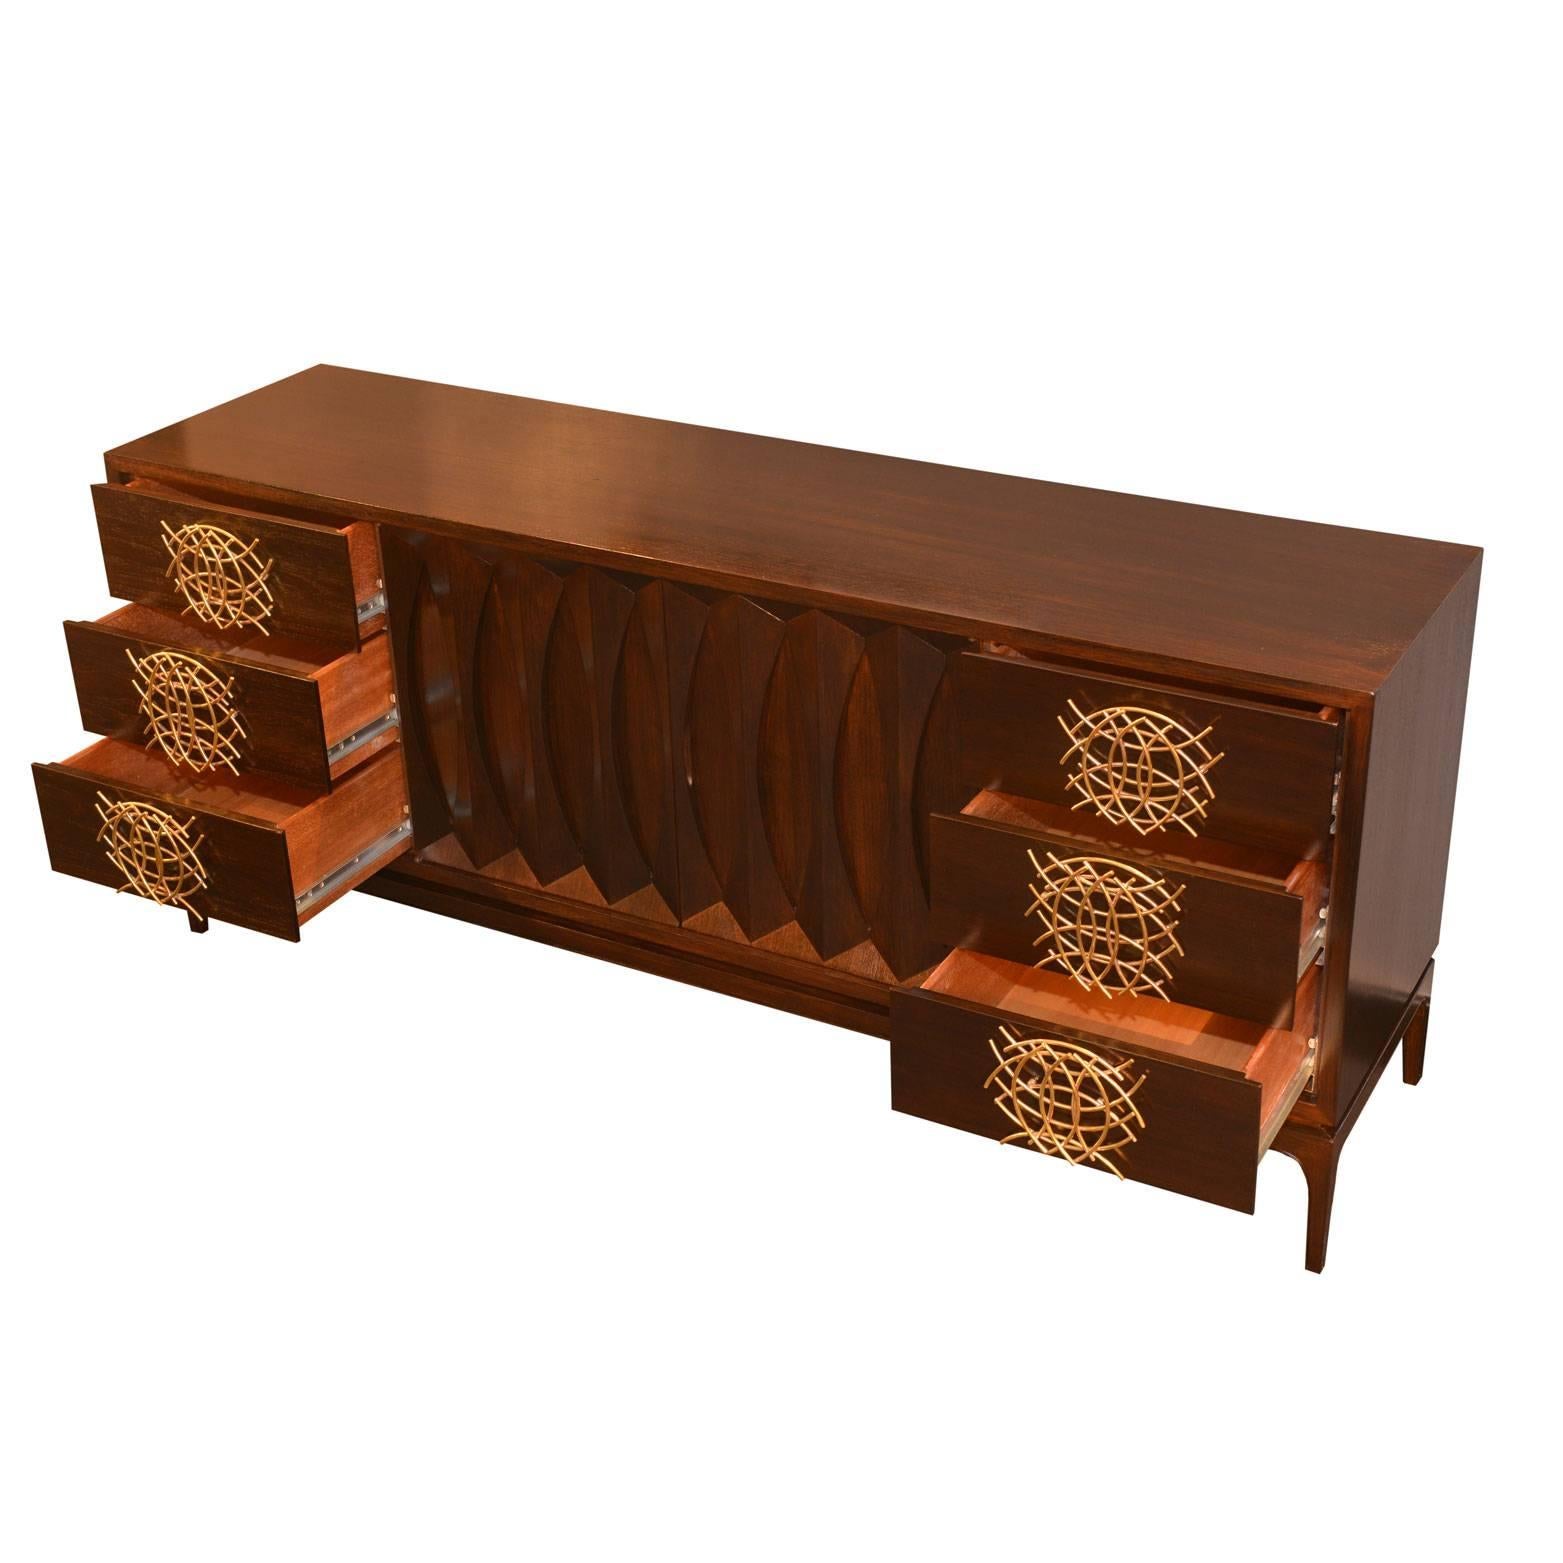 Stunning sideboard in darkened beechwood. The handmade brass handles replace the original wooden ones that were damaged. The style of the handles resembles the decorative motif of the central wooden doors.